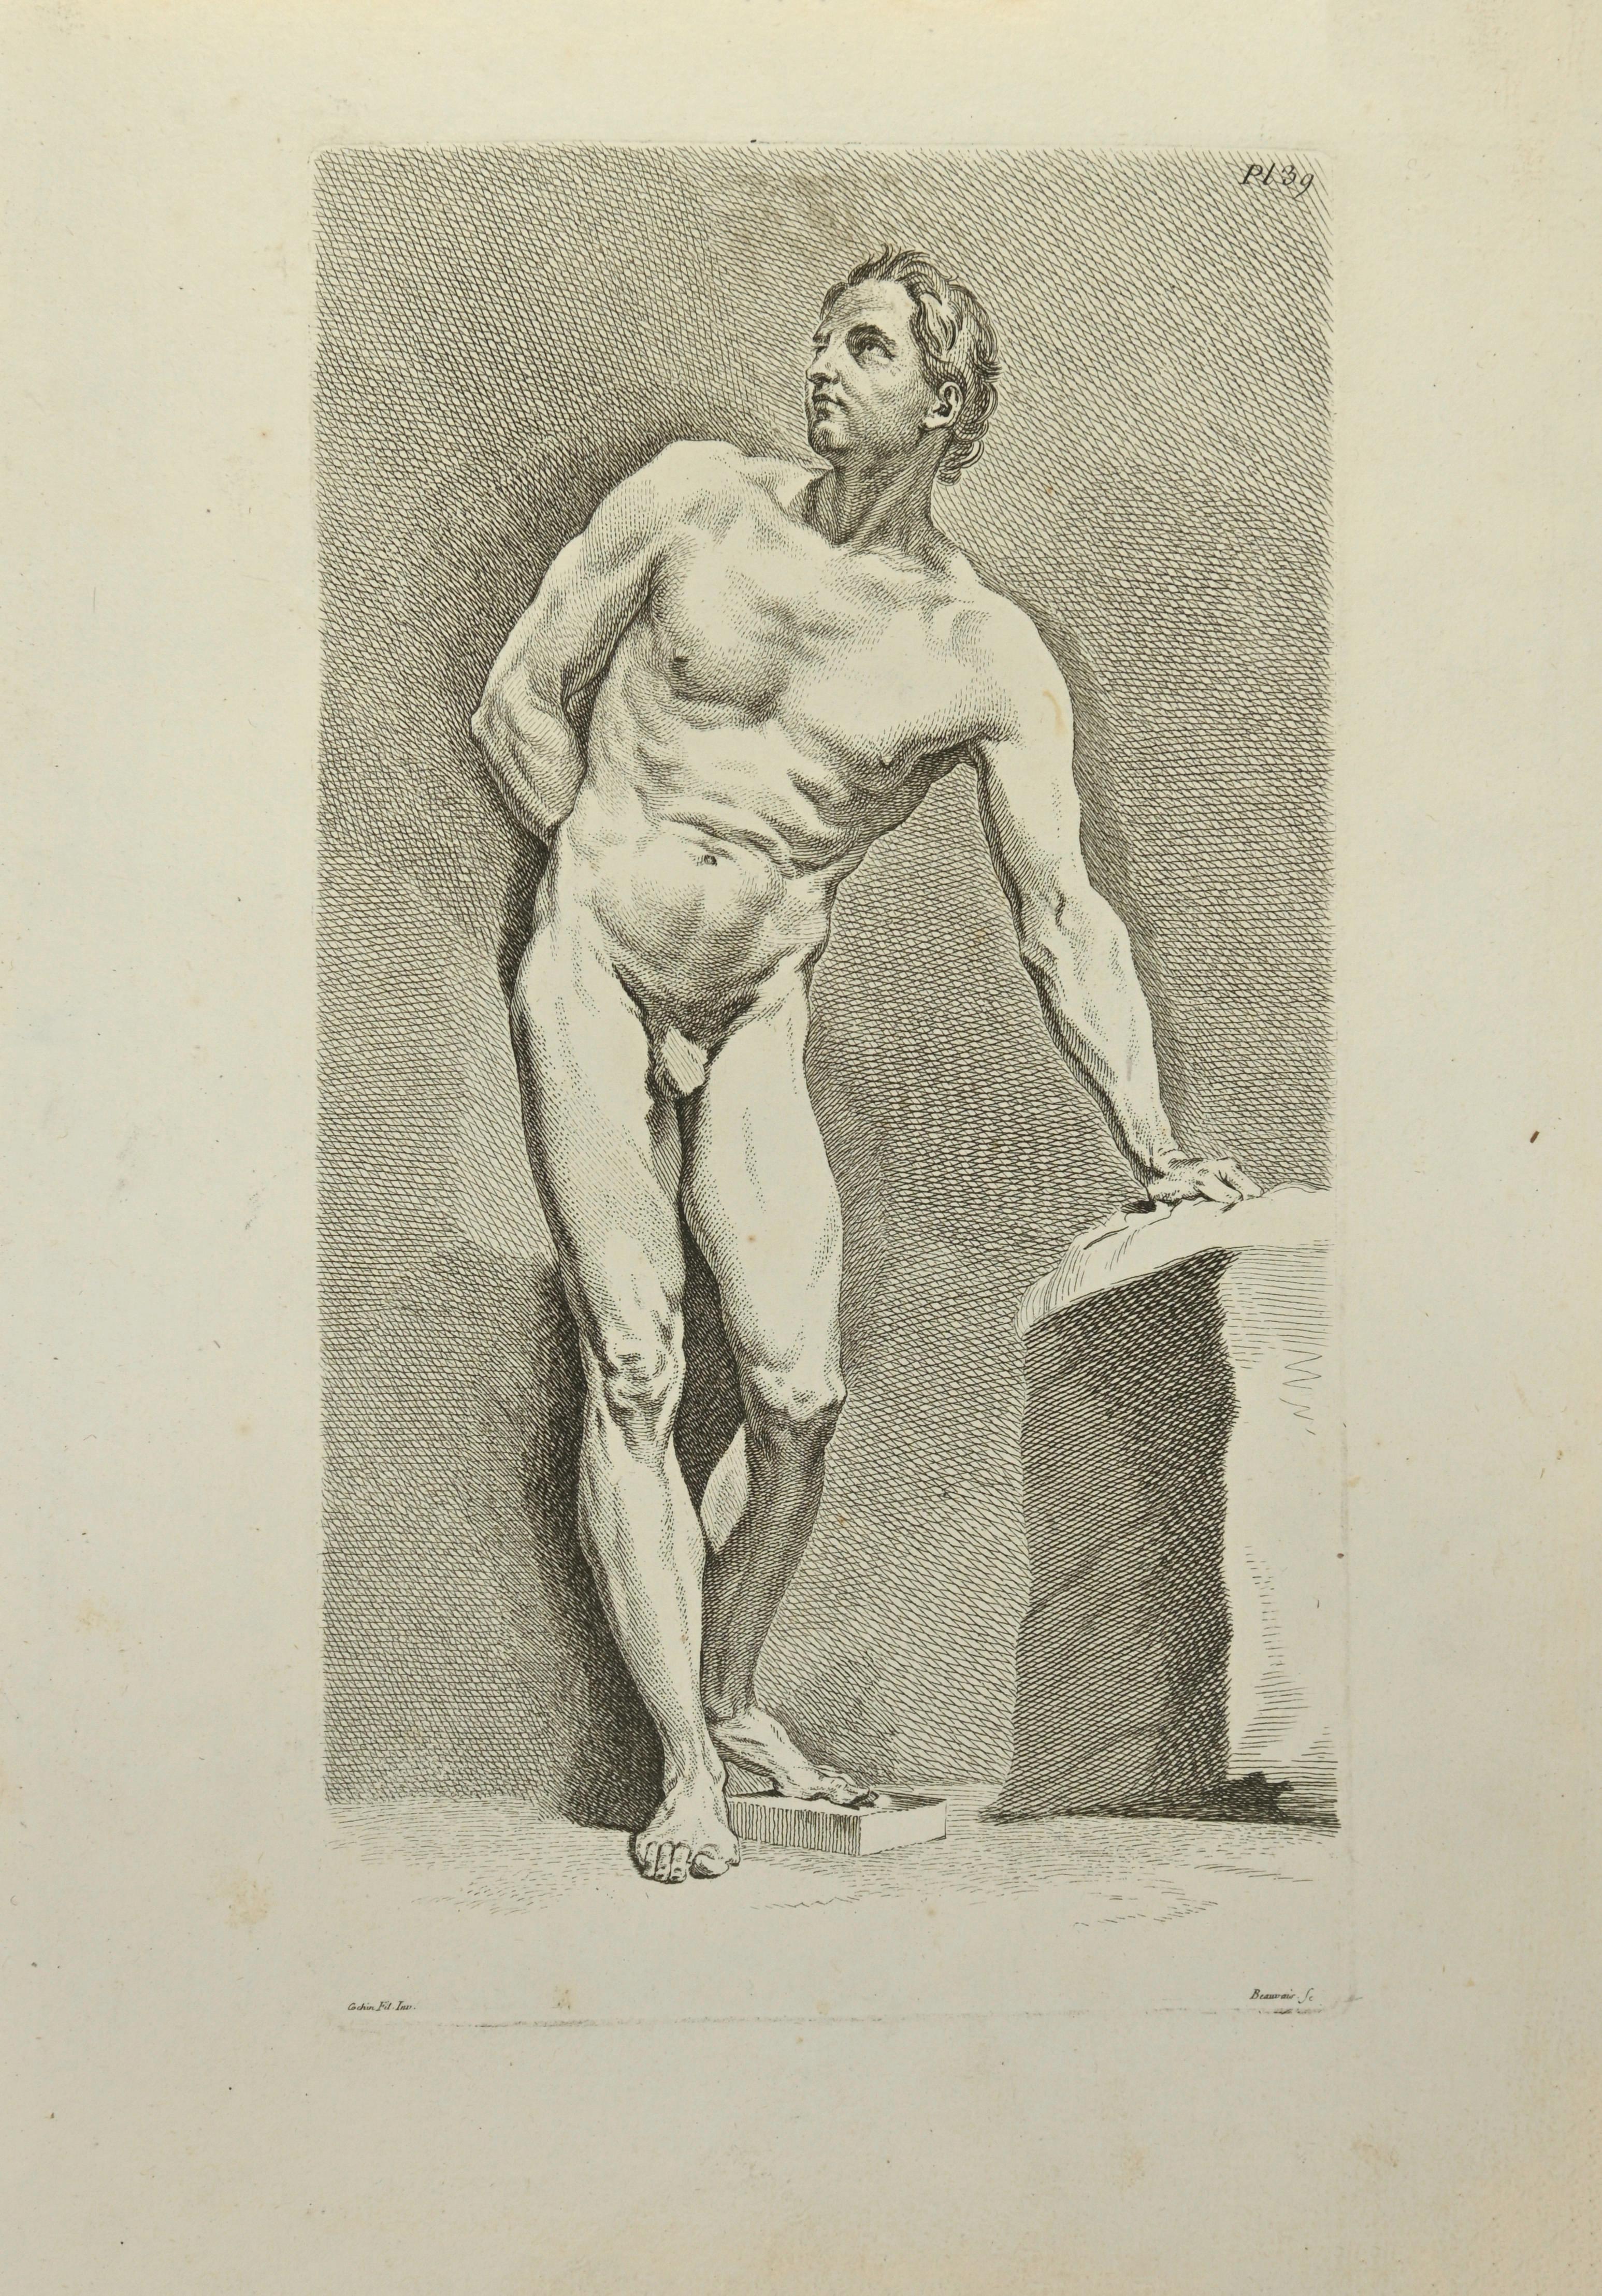 Anatomy Studies is an etching realized by Nicolas-Dauphin de Beauvais in the 18th Century.

Good conditions with foxing.

Signed on plate.

The artwork is depicted through confident strokes.